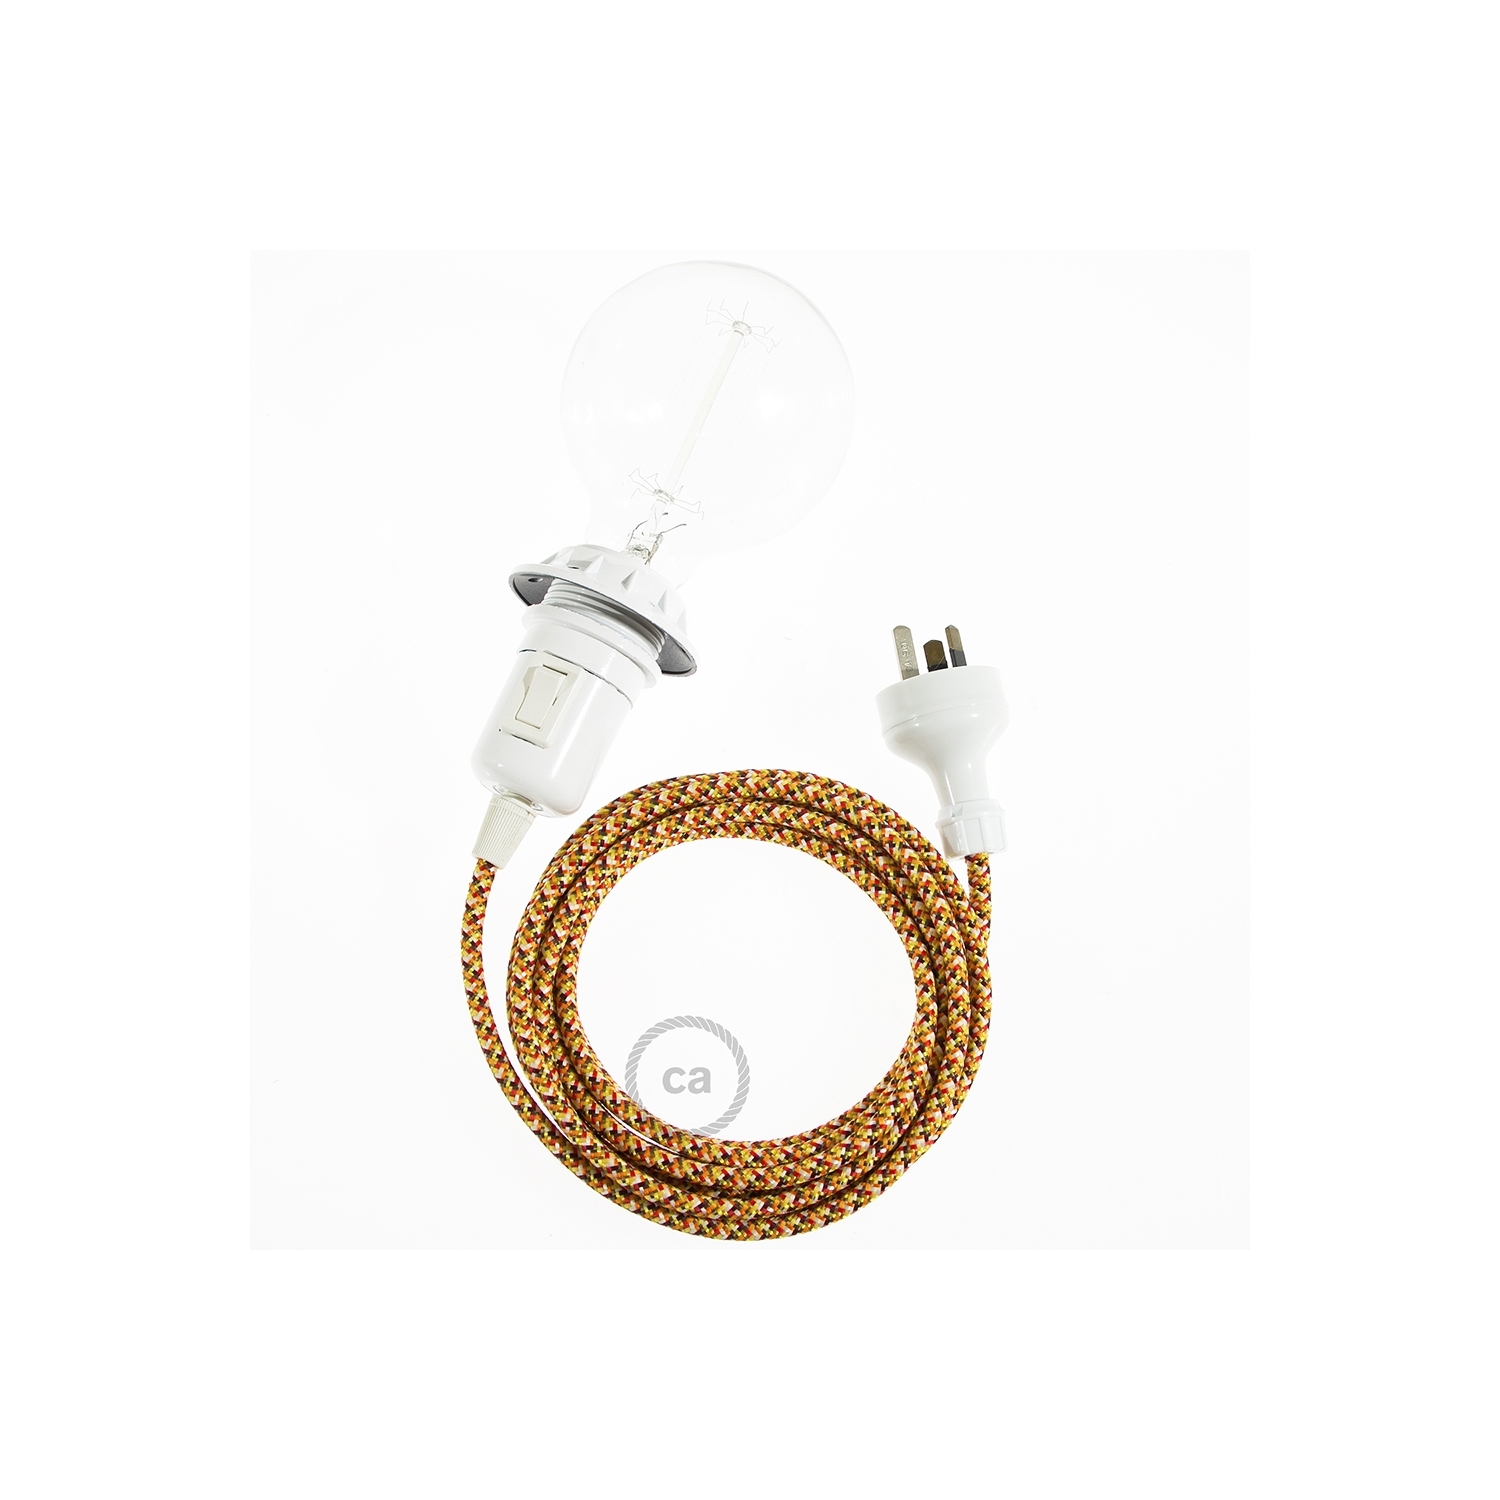 Create your RX01 Pixel Orange Snake for lampshade and bring the light wherever you want.